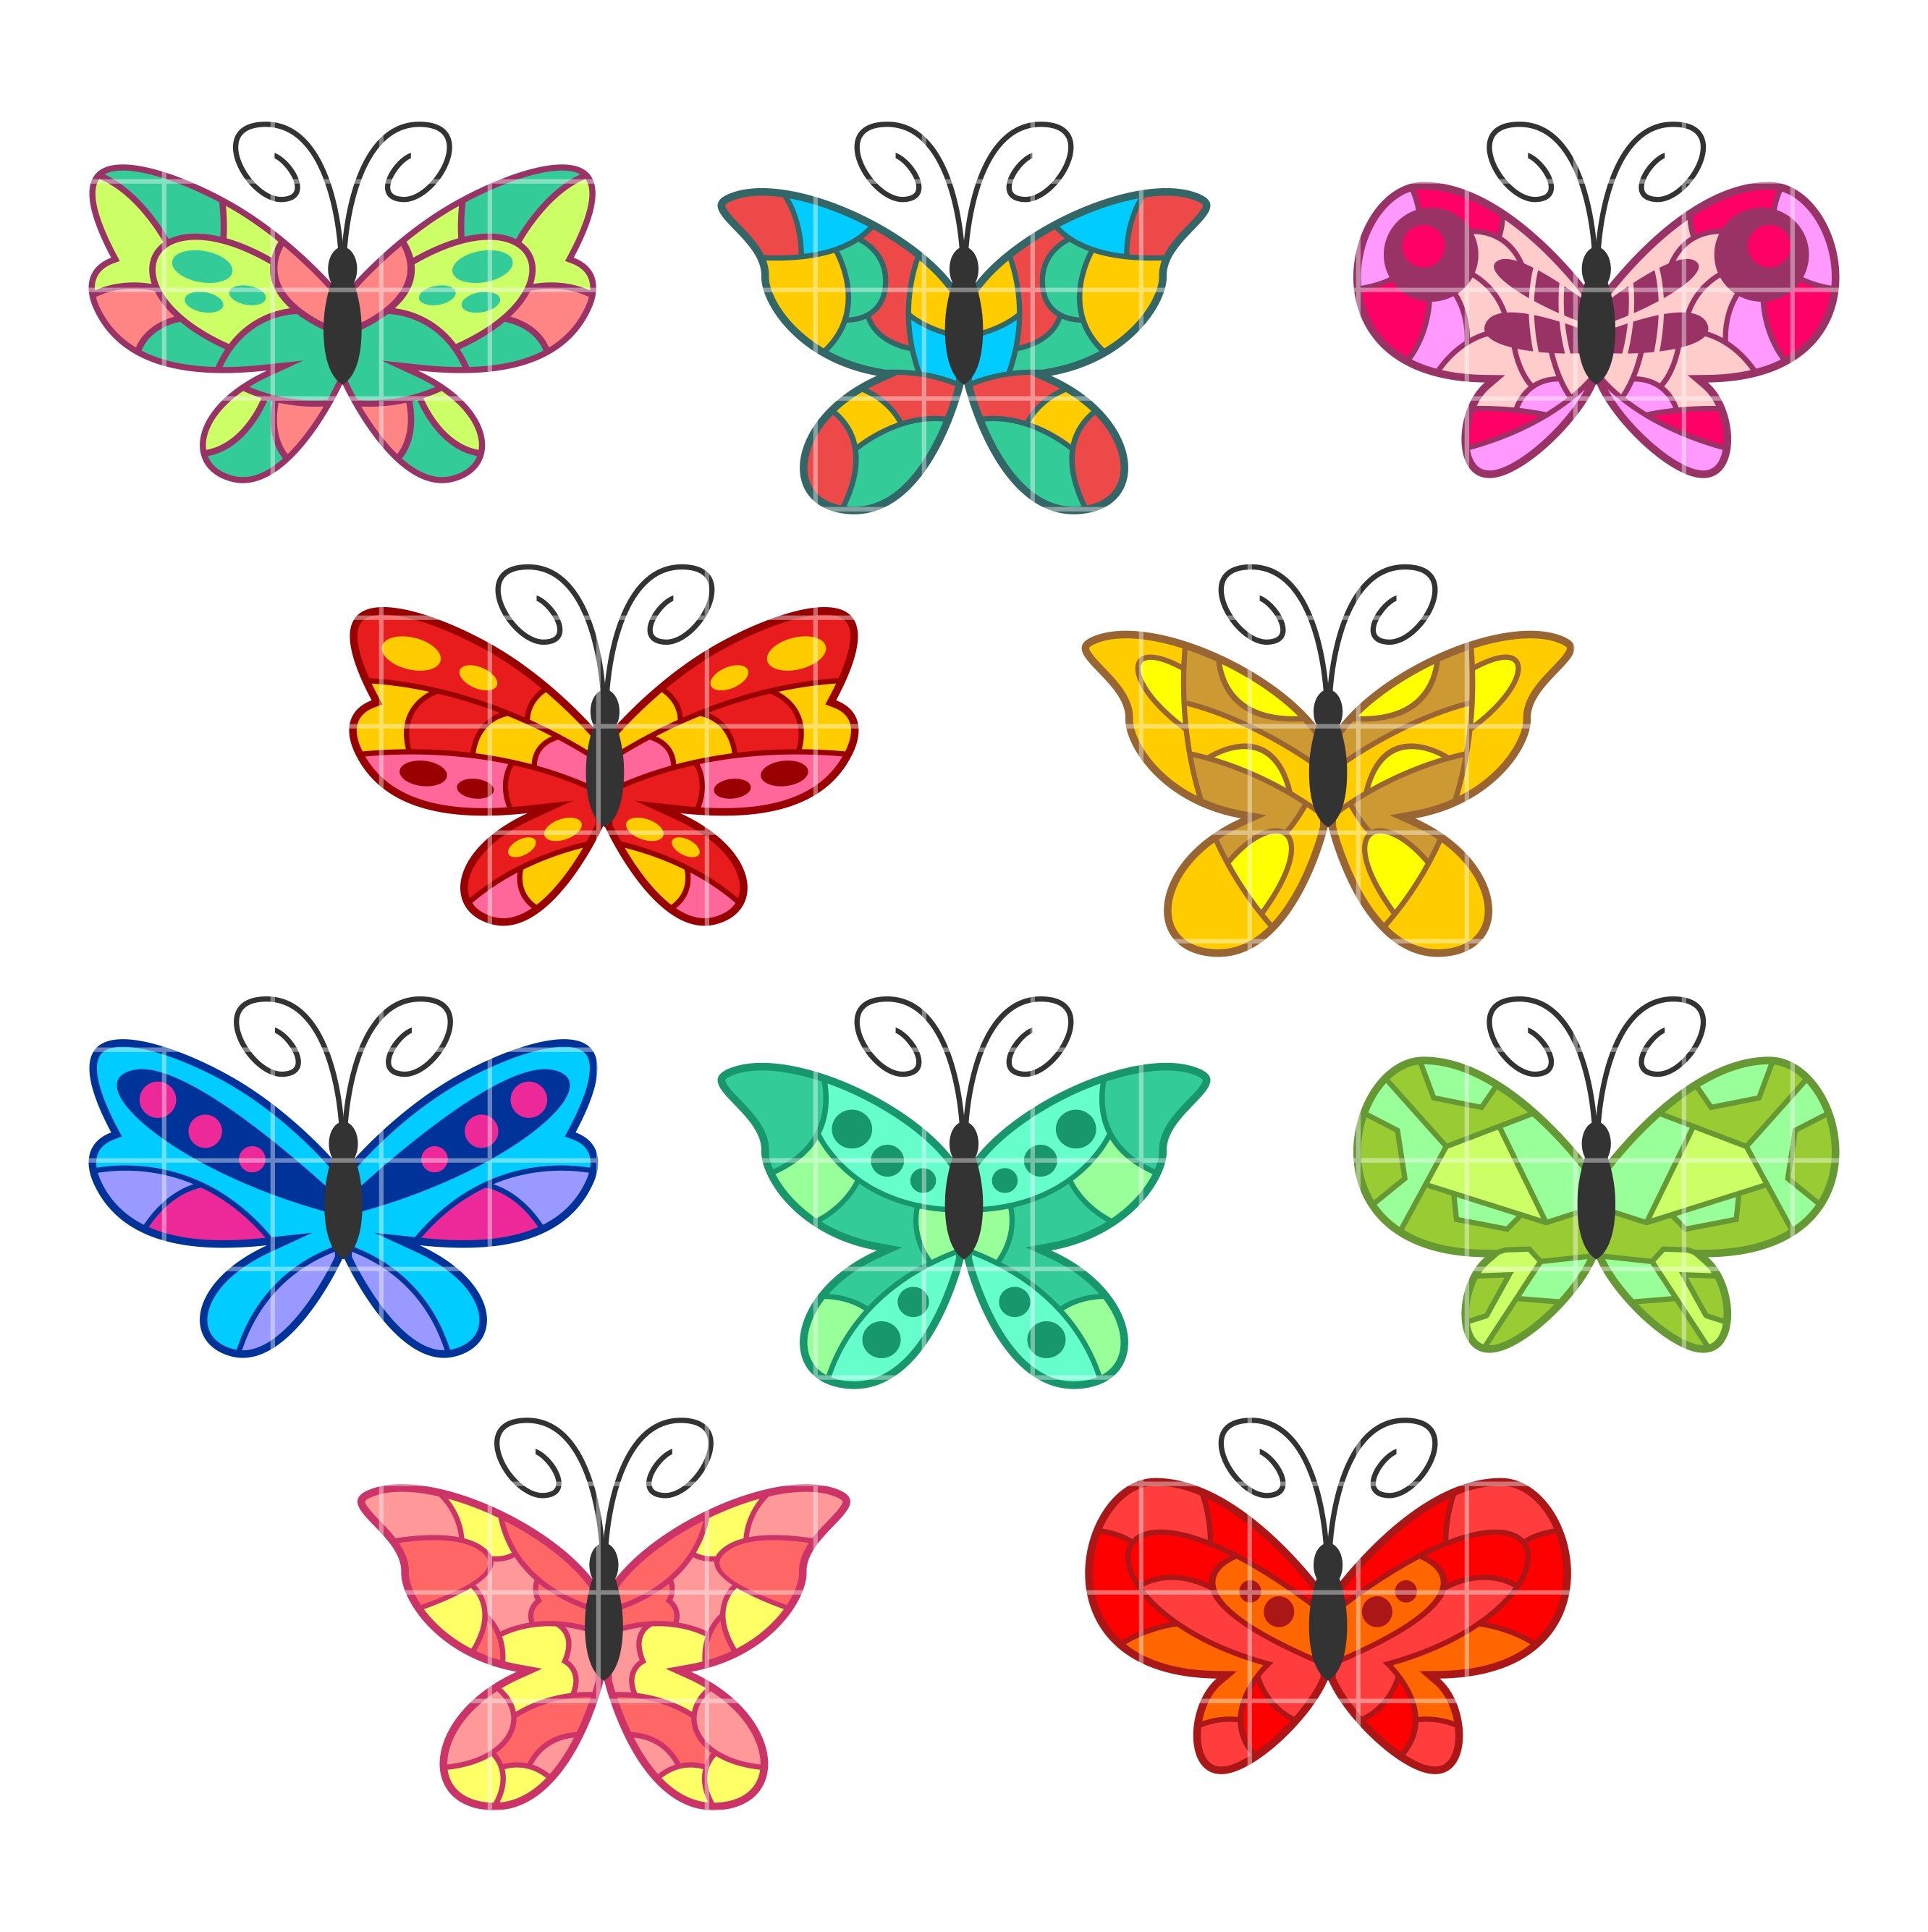 Butterflies Colorful Butterfly Designs Hd Image Clipart